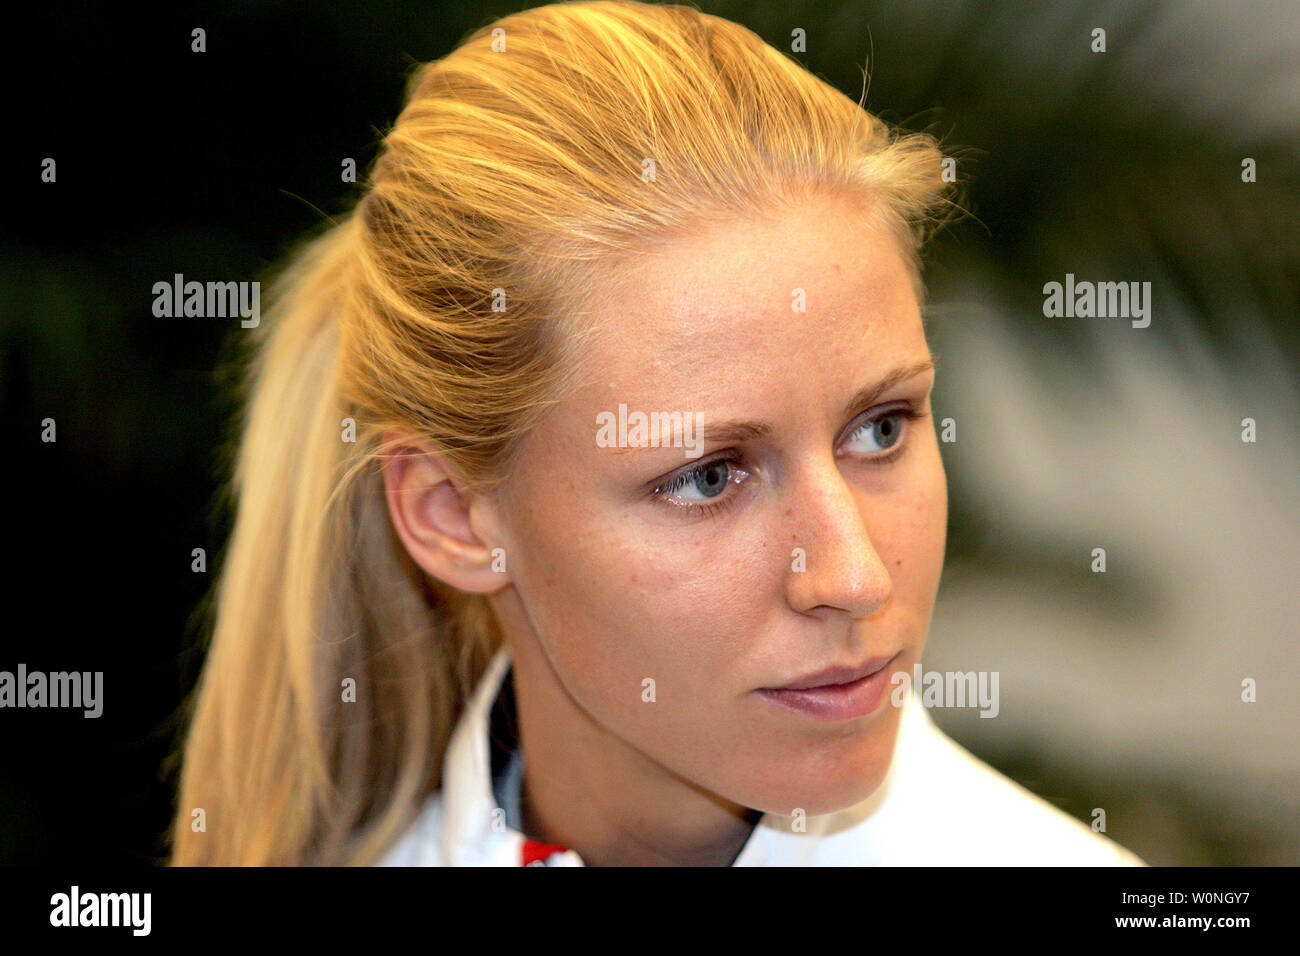 Elena Dementieva of Russia answers questions from French journalists at the Zurich Open, WTA women's tennis tournament in Zurich, Switzerland on October 19, 2005. Dementieva plays Nathalie Dechy of France later today in second round action. Finals are on Sunday, October 23, 2005.  (UPI Photo/Tom Theobald) Stock Photo